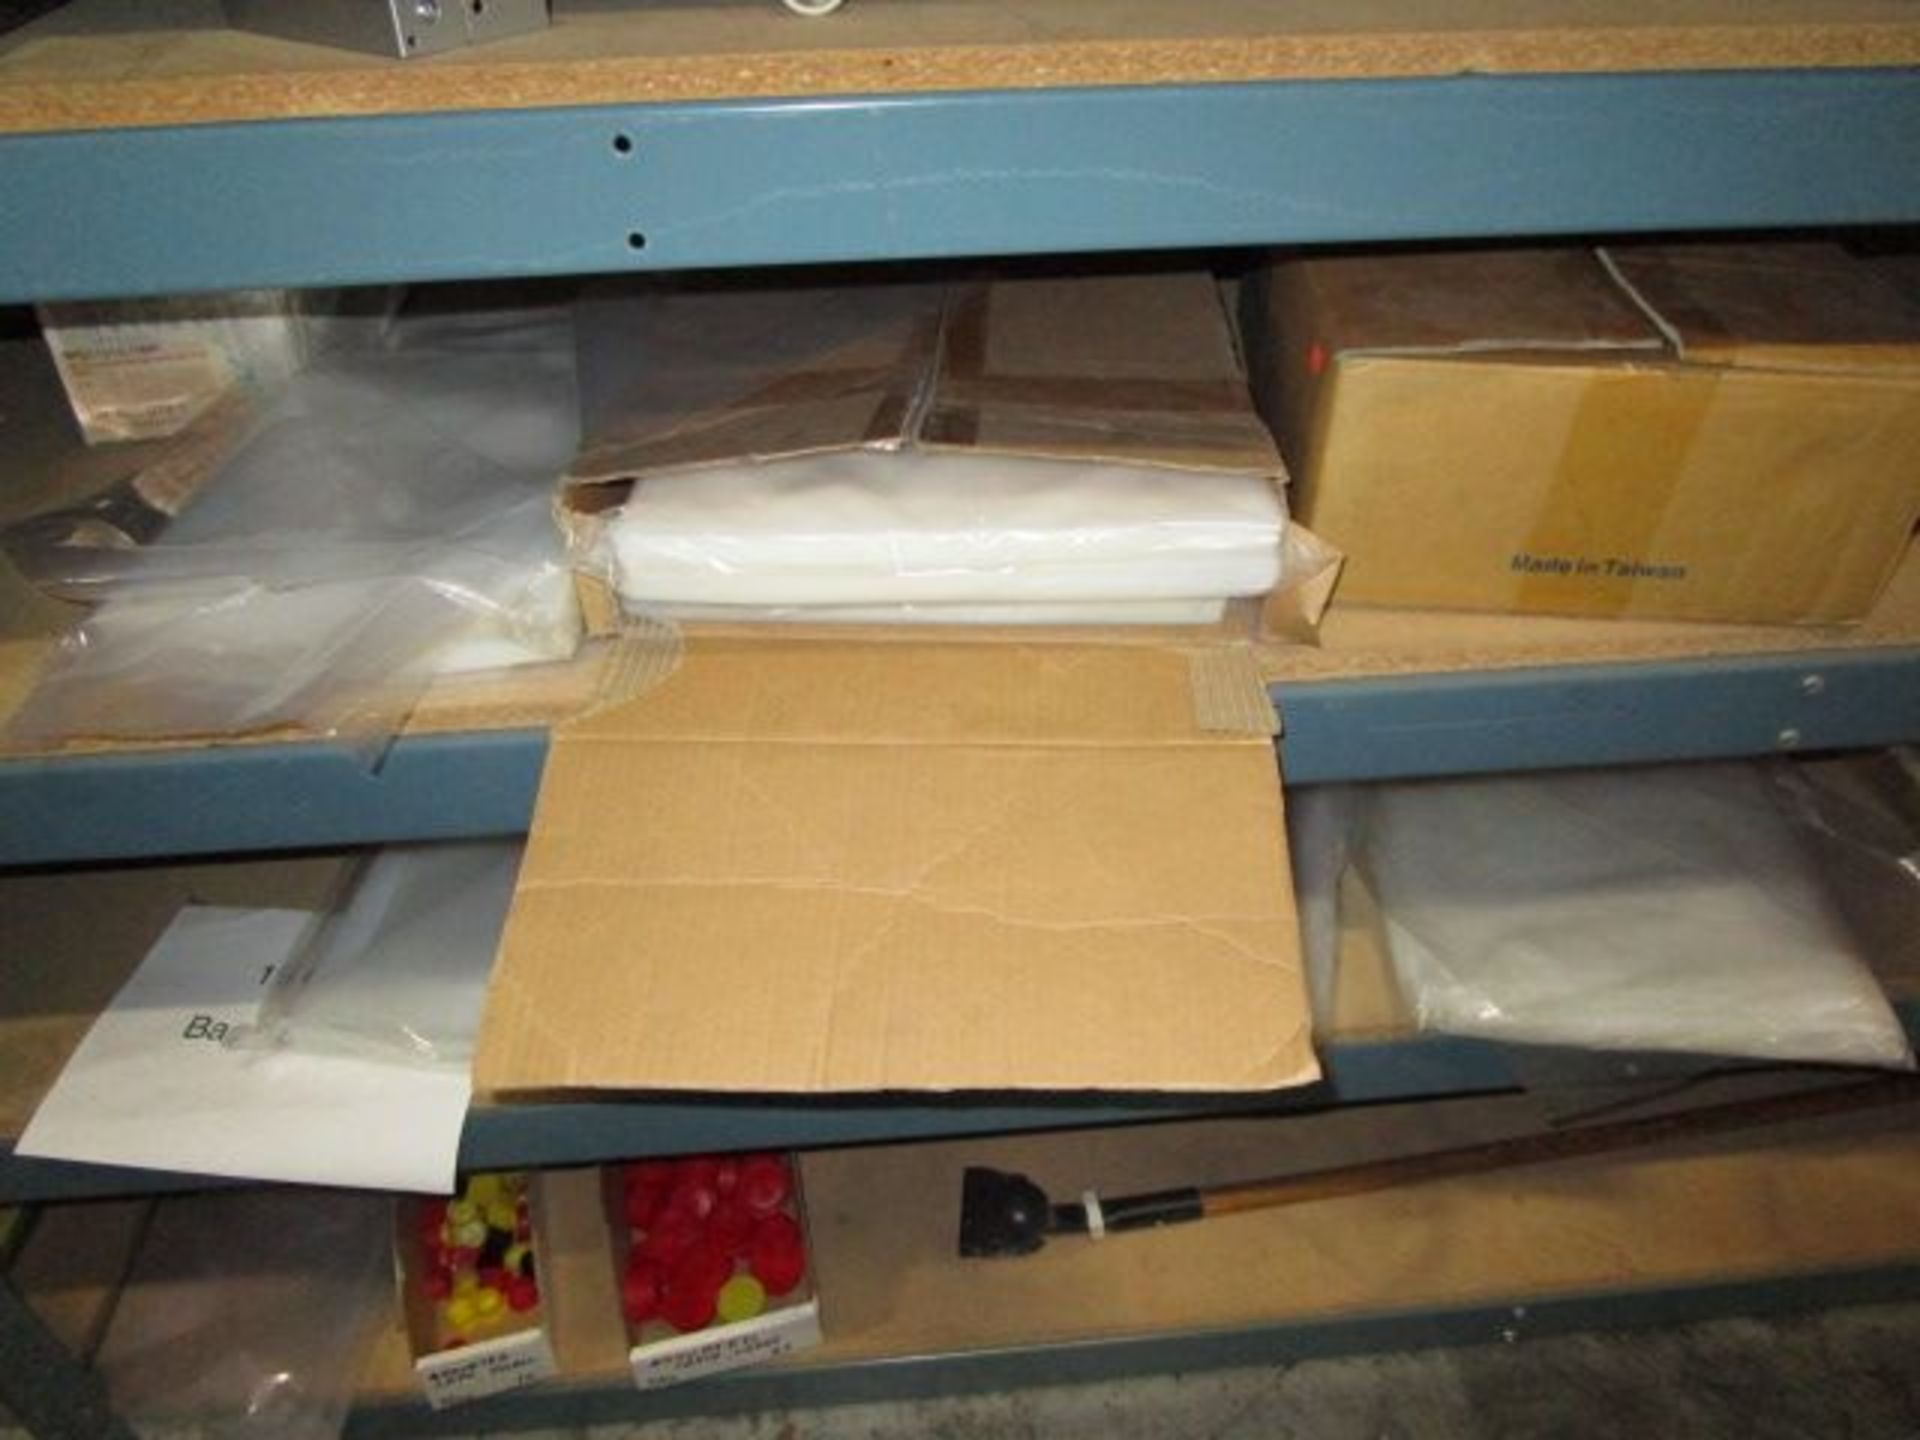 SHELVING UNIT OF ASSORTMENT OF OFFICE SUPPLIES - Image 6 of 10